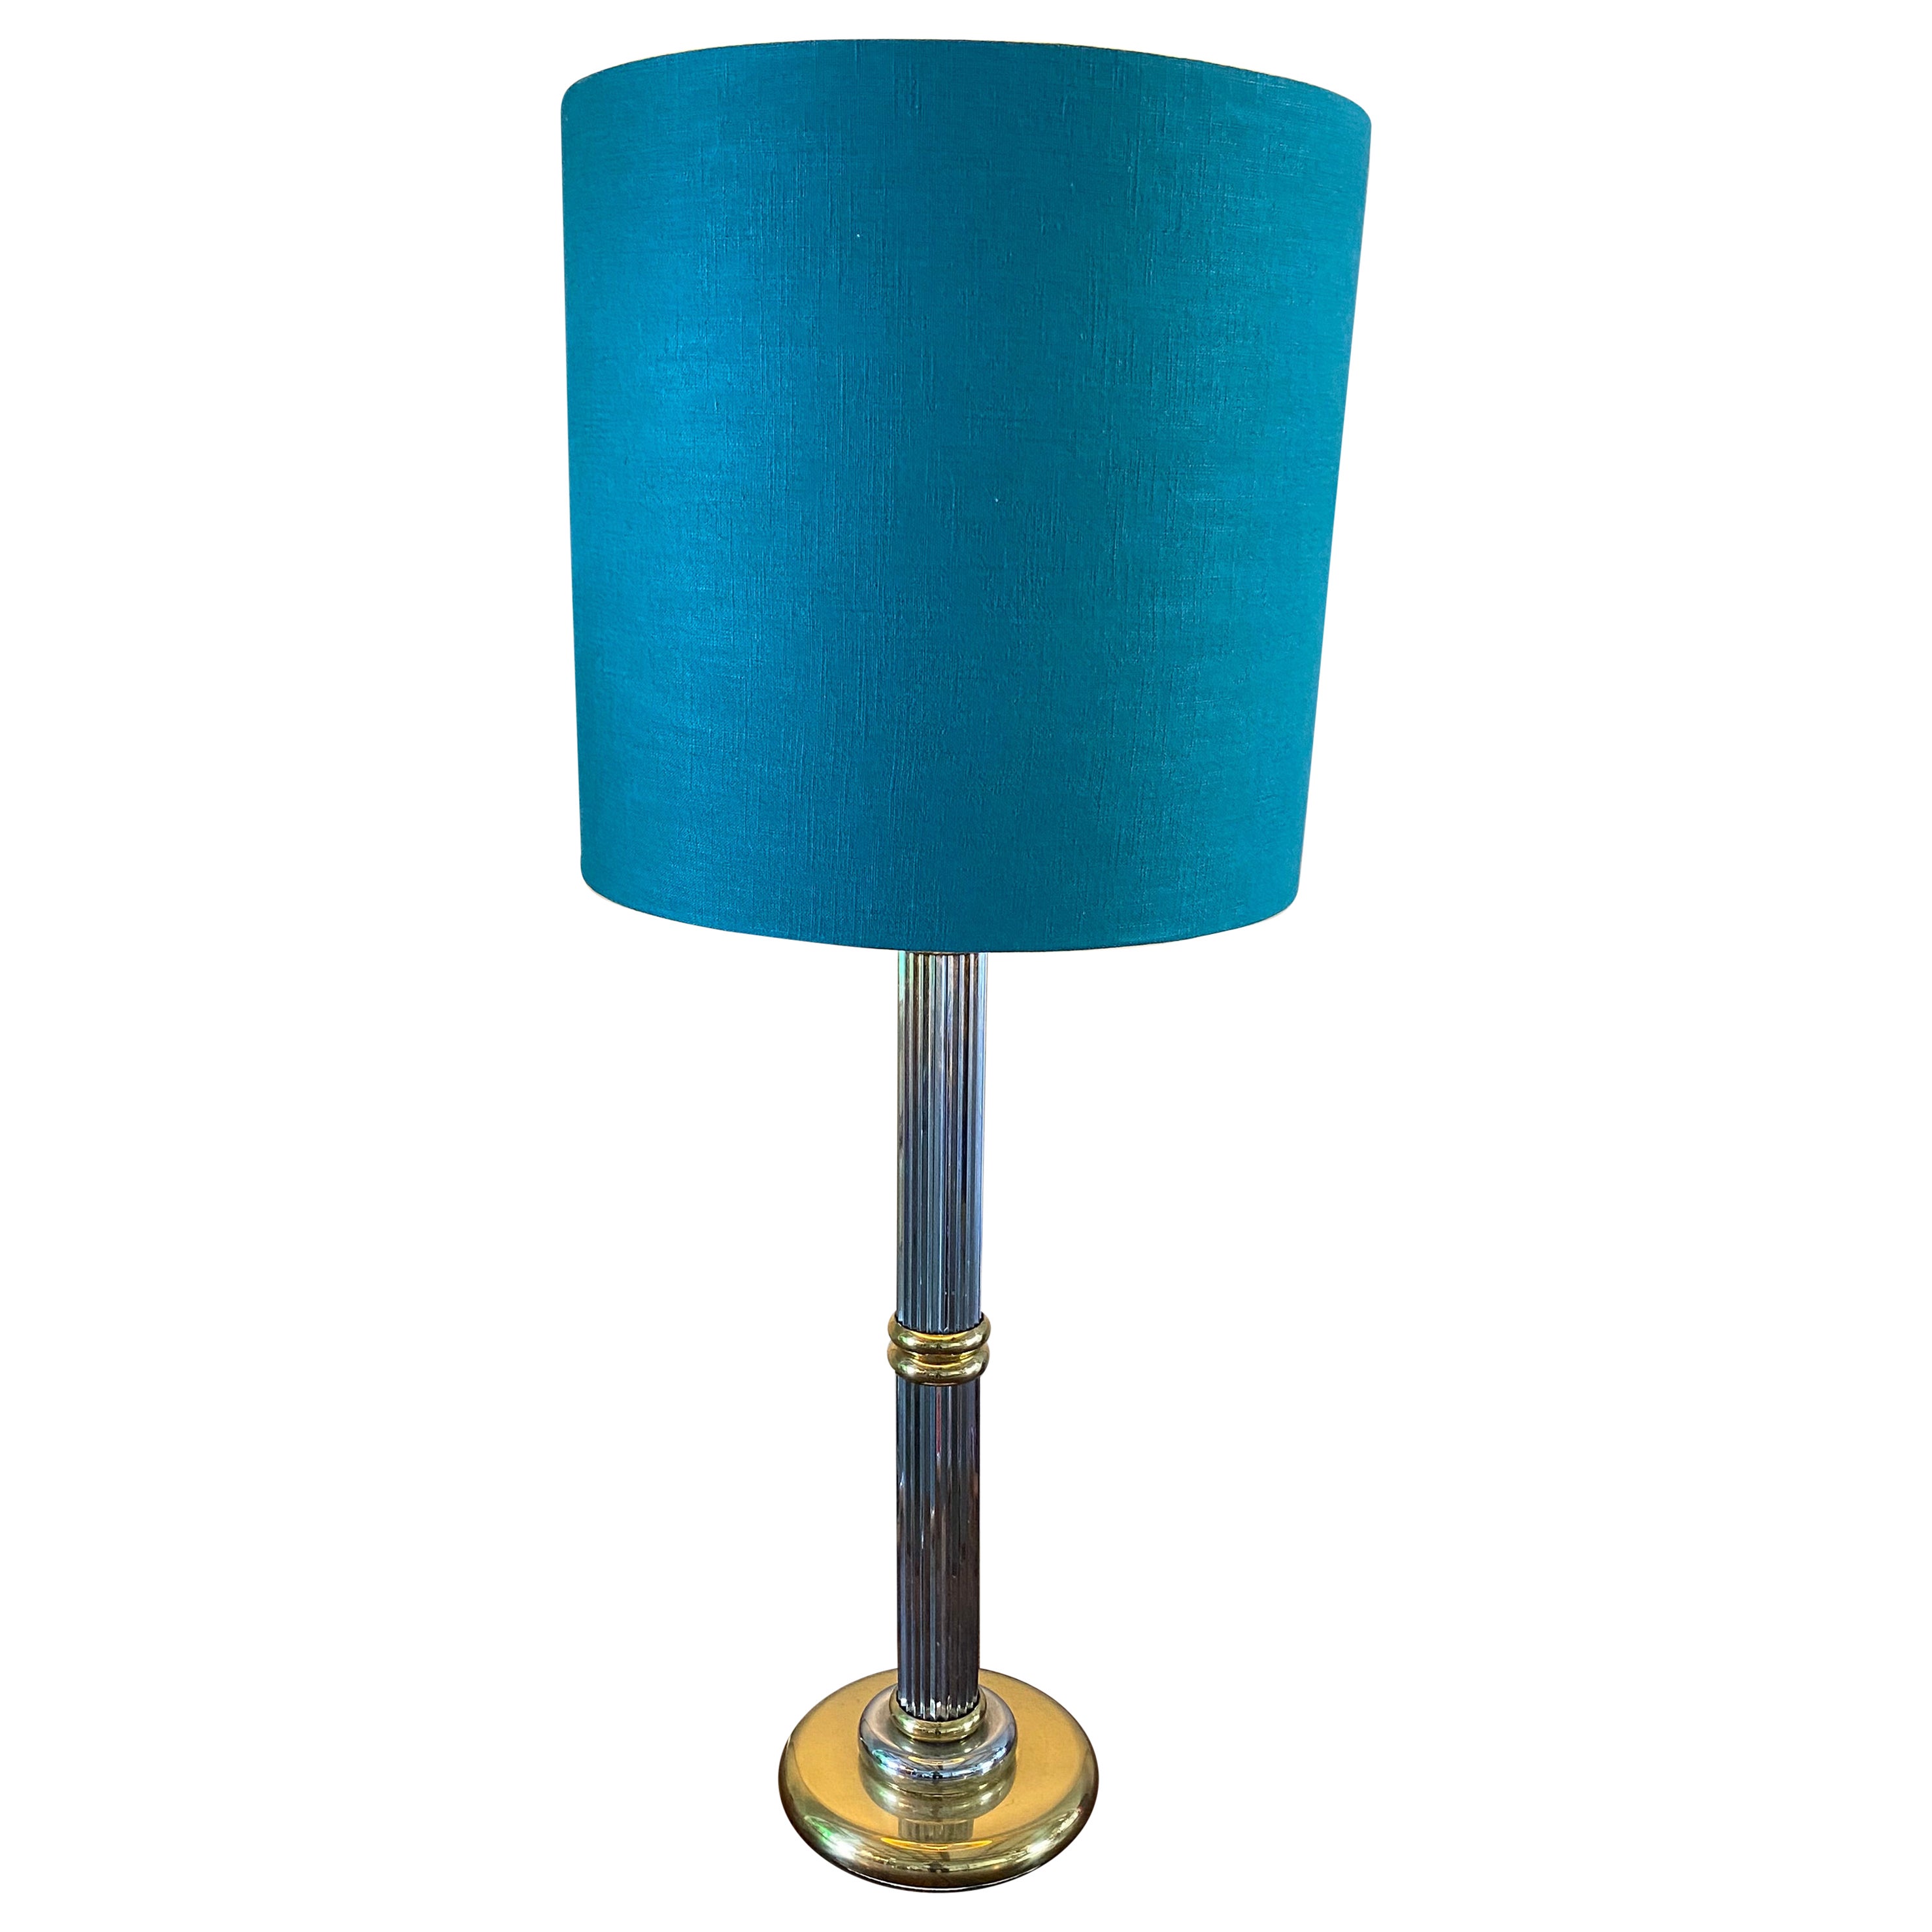 Tall table lamp, bicolor style, Hollywood Regency style, turquoise lampshade